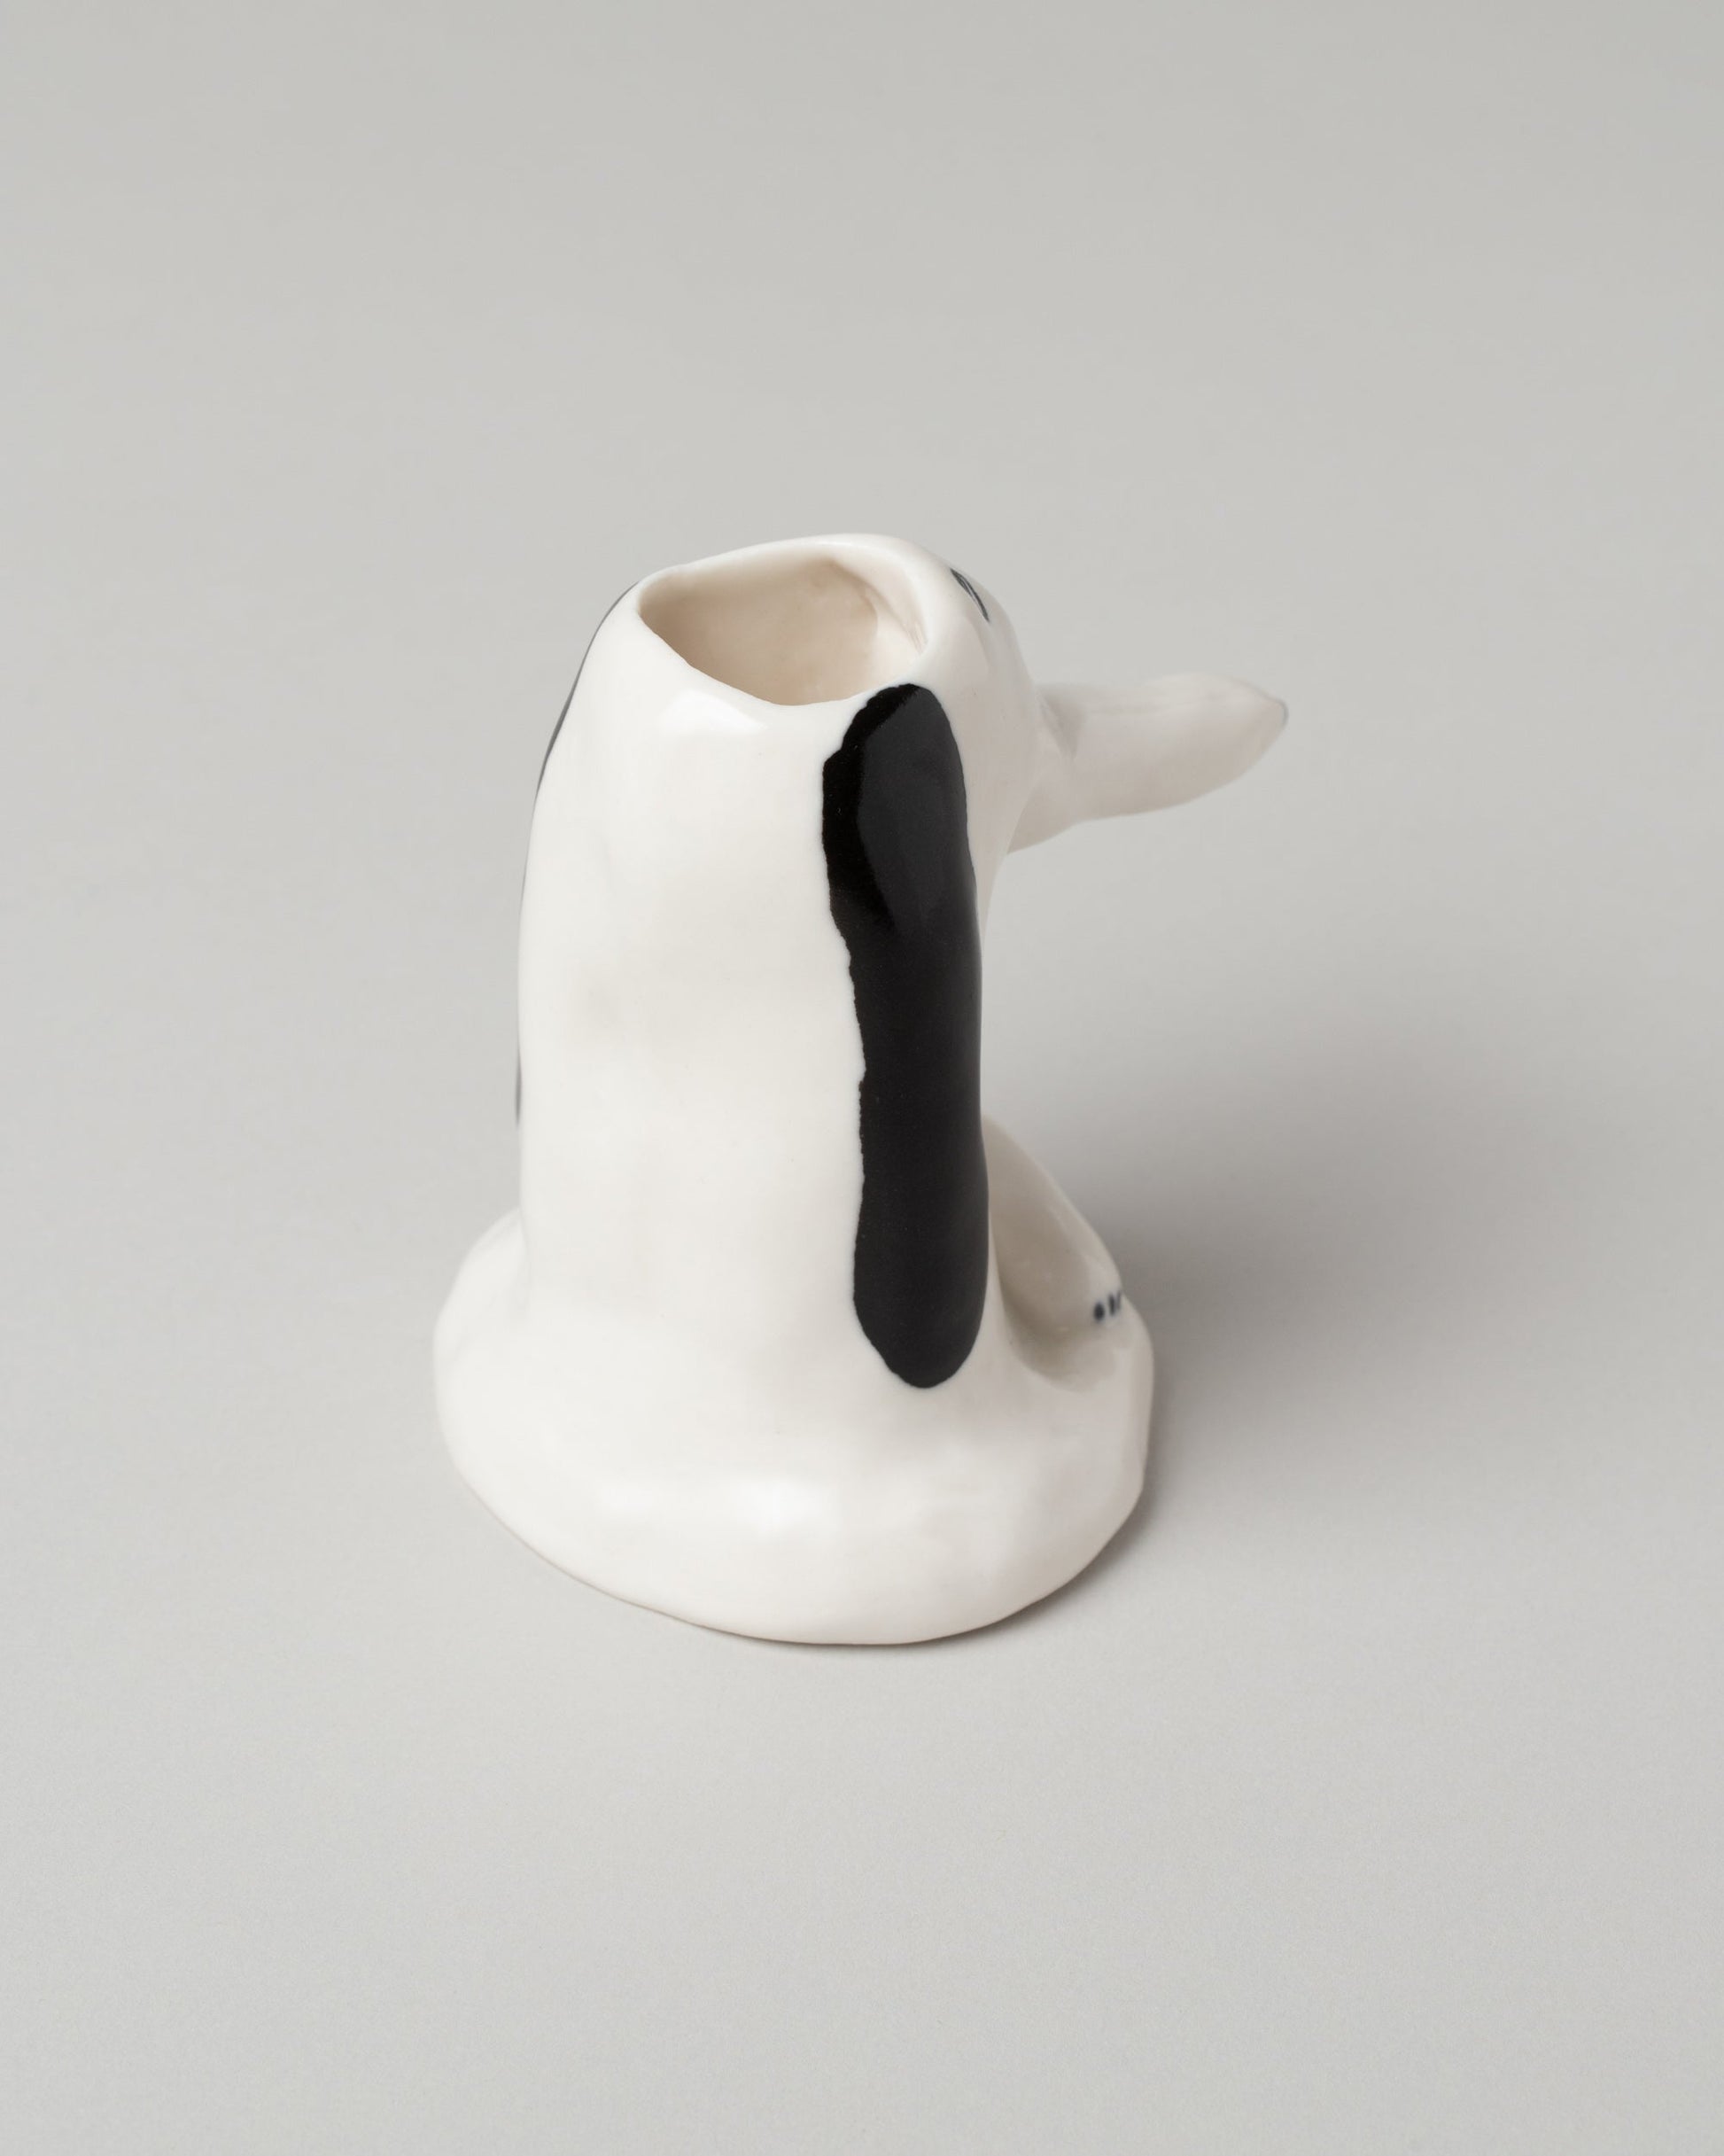 View from the back of the Eleonor Boström Dog Head Vase on light color background.